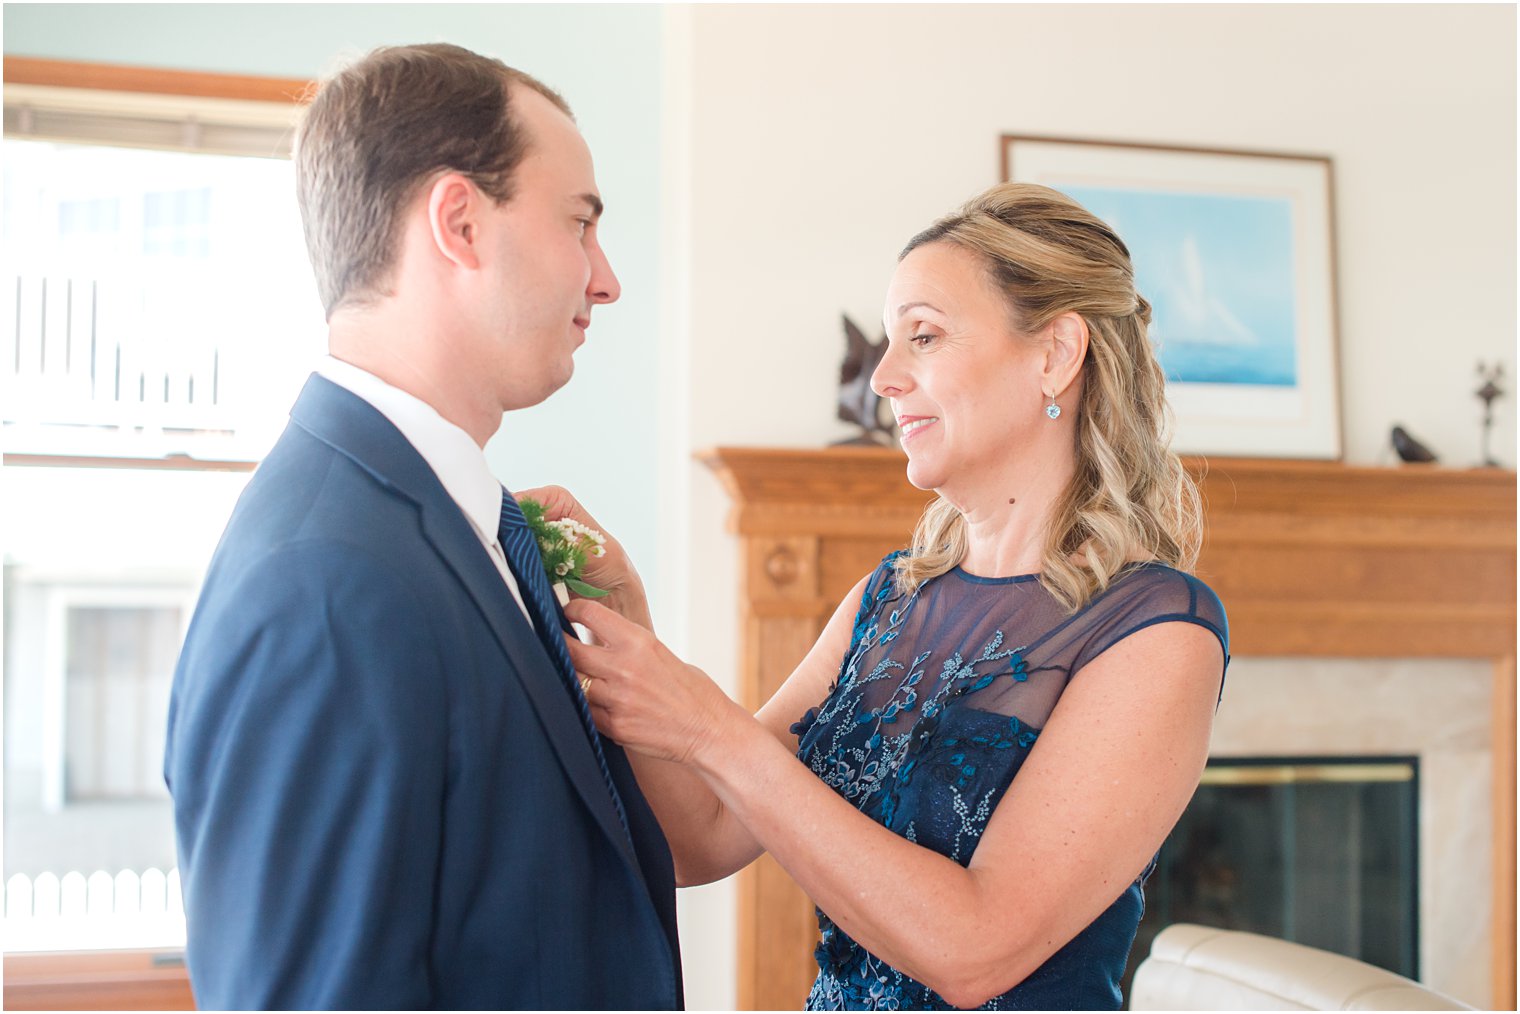 mother of groom adjusts boutonniere for groom in navy suit 